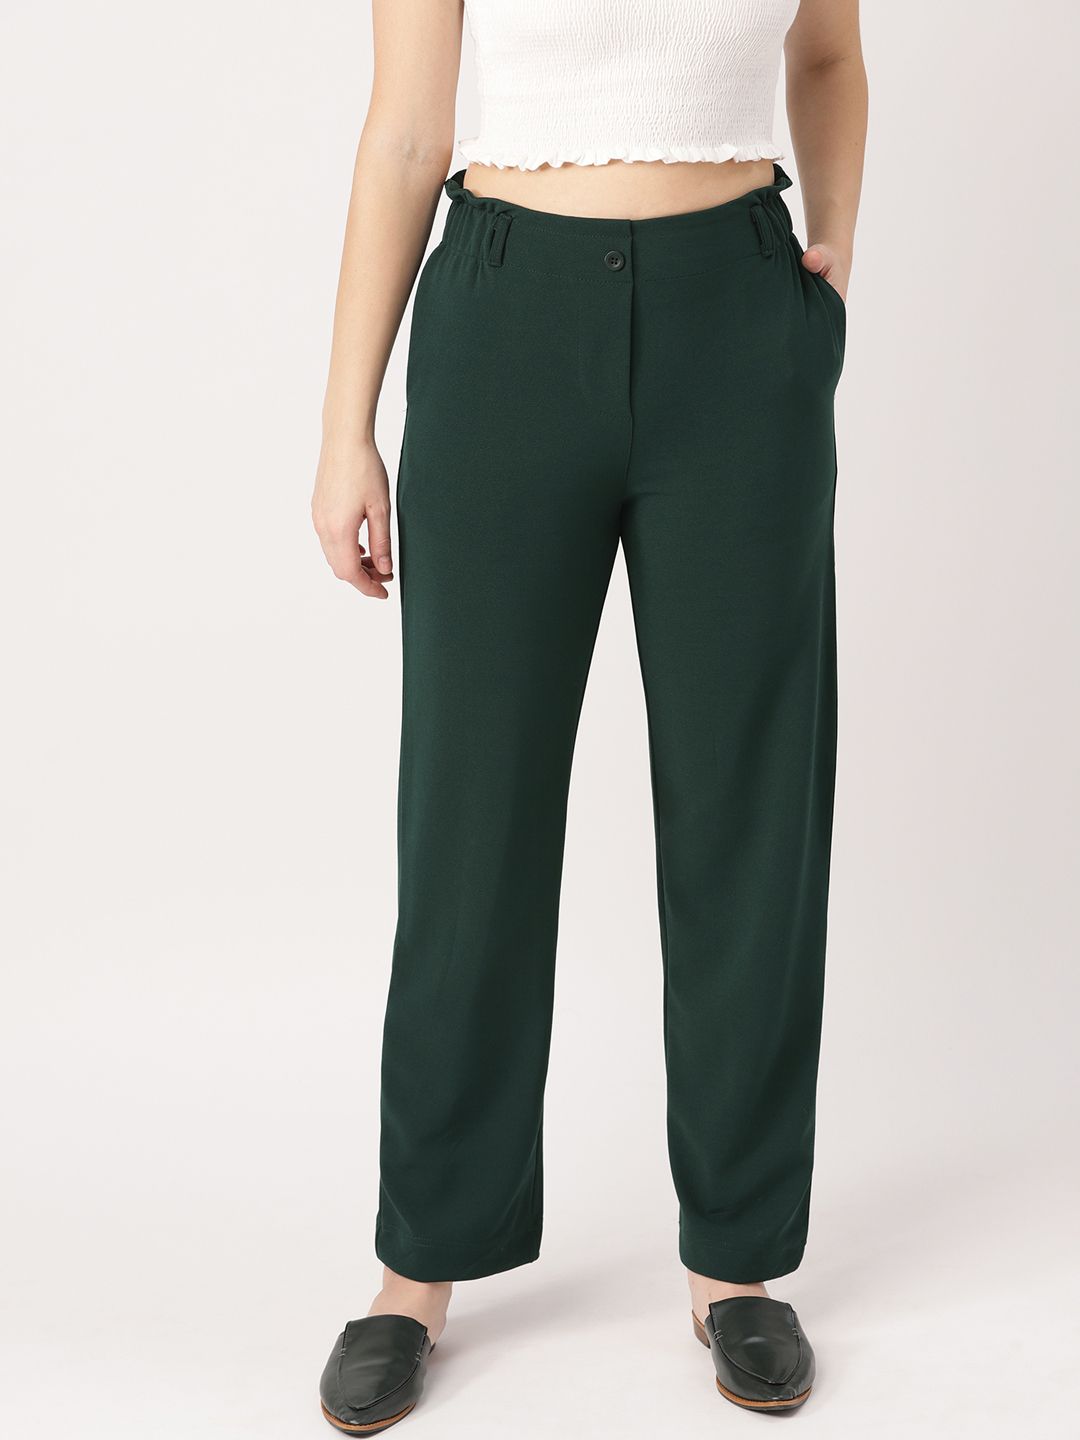 SAVE ₹1224 on DressBerry Women Green Solid Regular Trousers